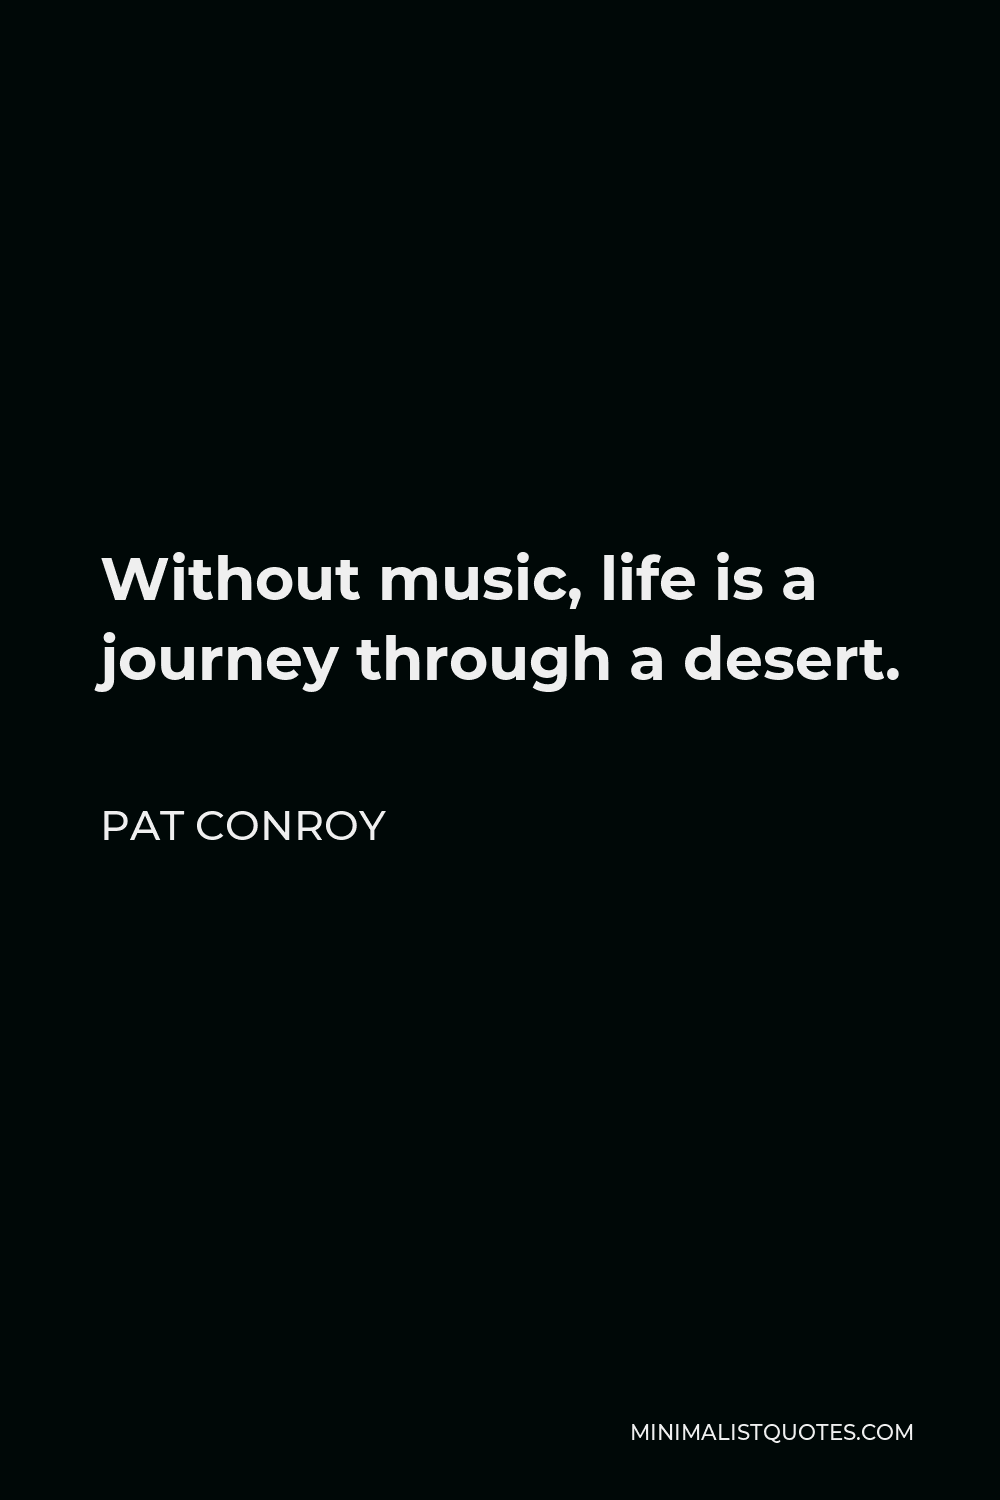 Pat Conroy Quote - Without music, life is a journey through a desert.